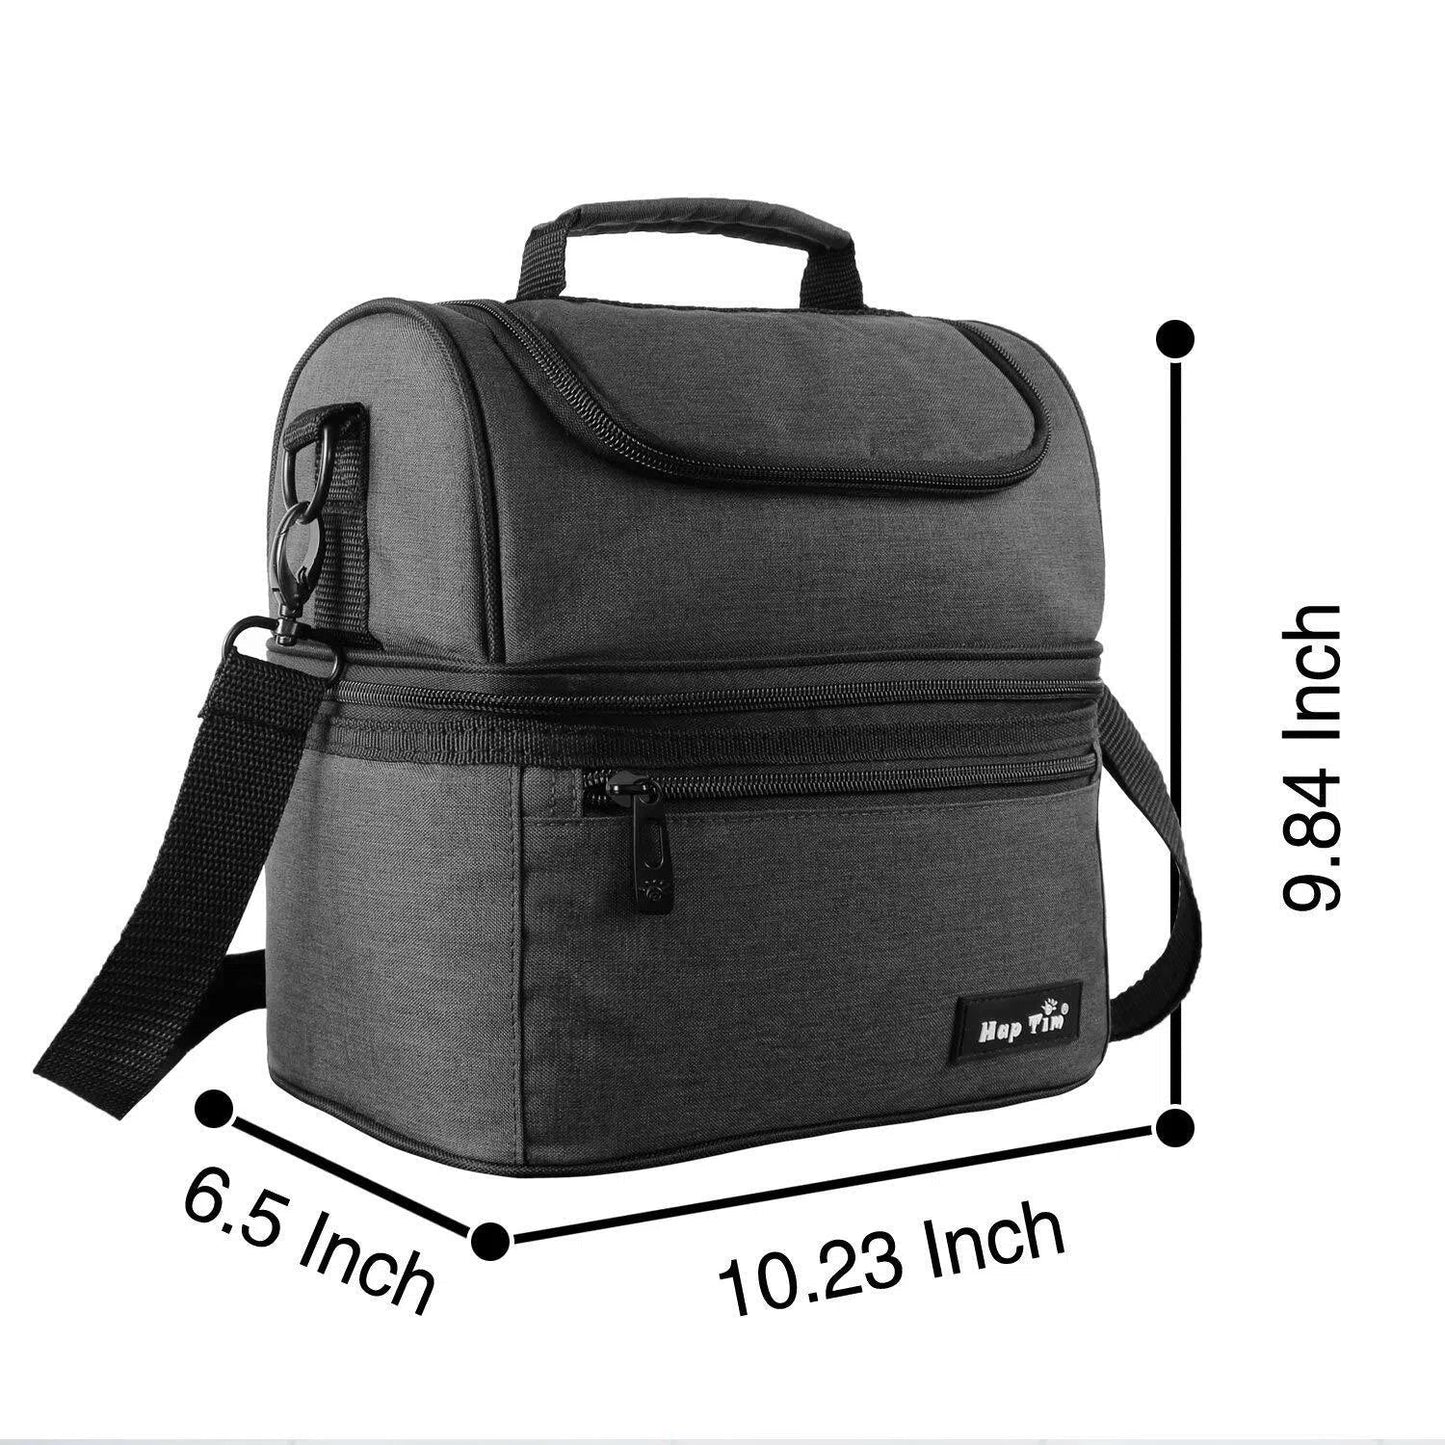 Hap Tim Lunch Box Insulated Lunch Bag Large Cooler Tote Bag (16040-DG)